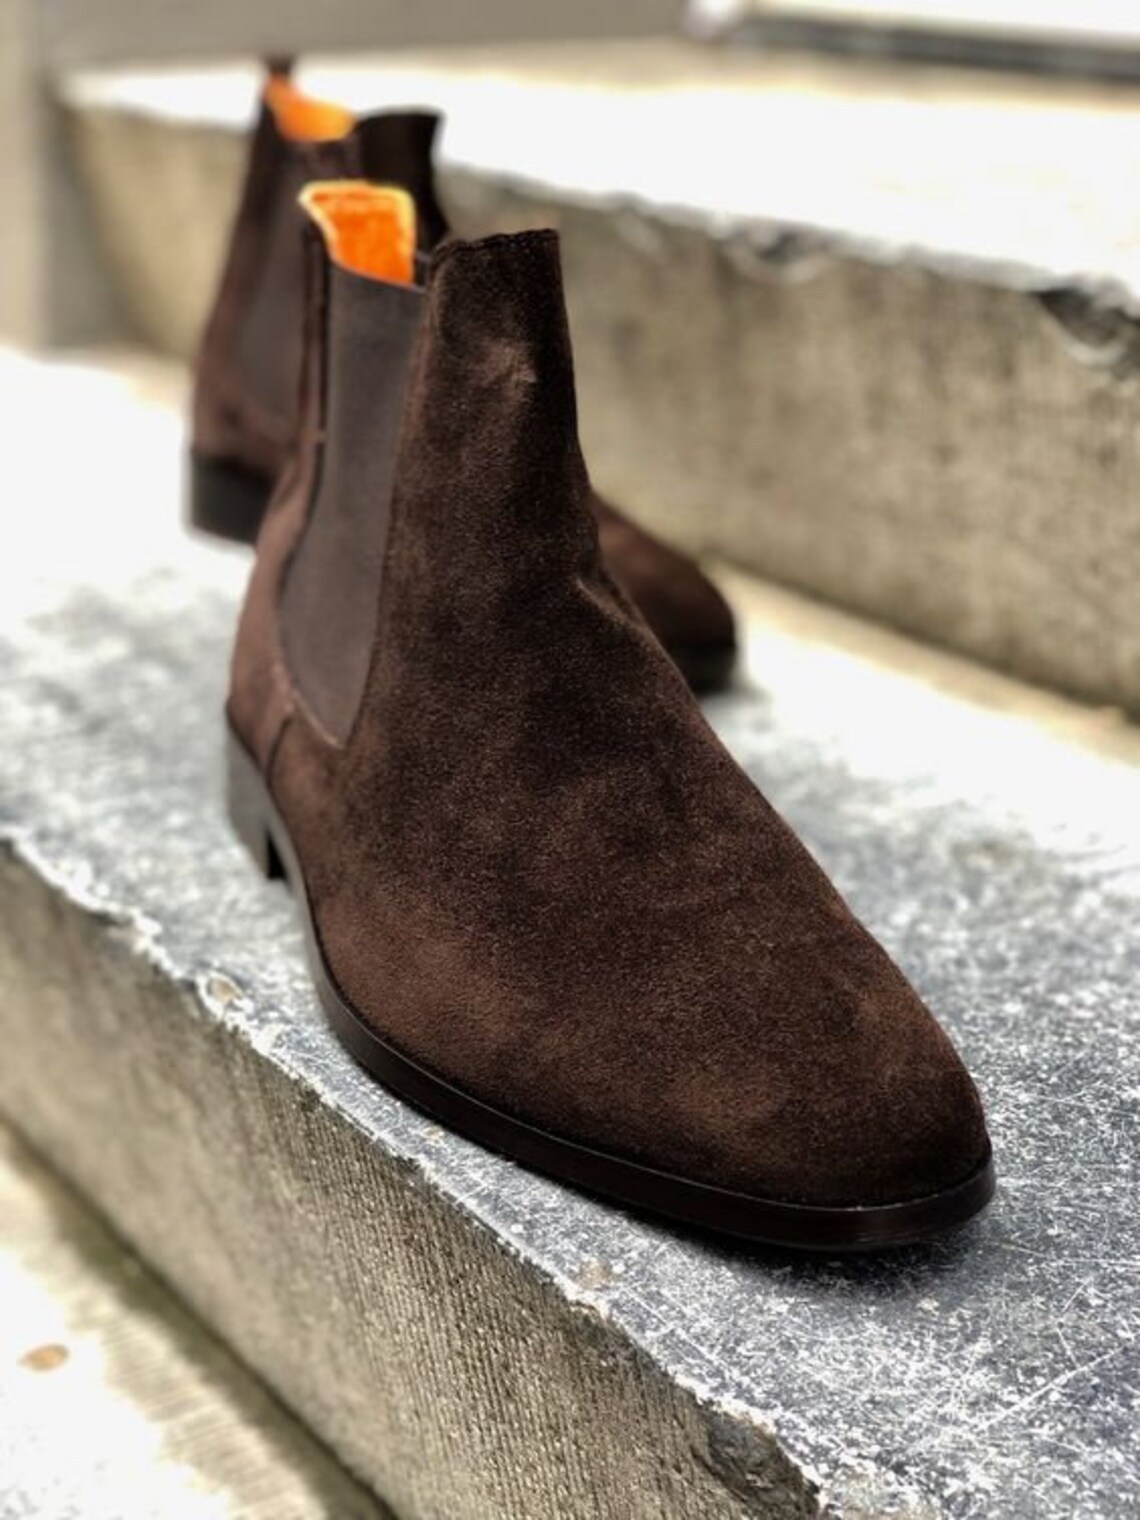 New Pure Handmade Dark Brown Suede Leather Chelsea Boot For Men's